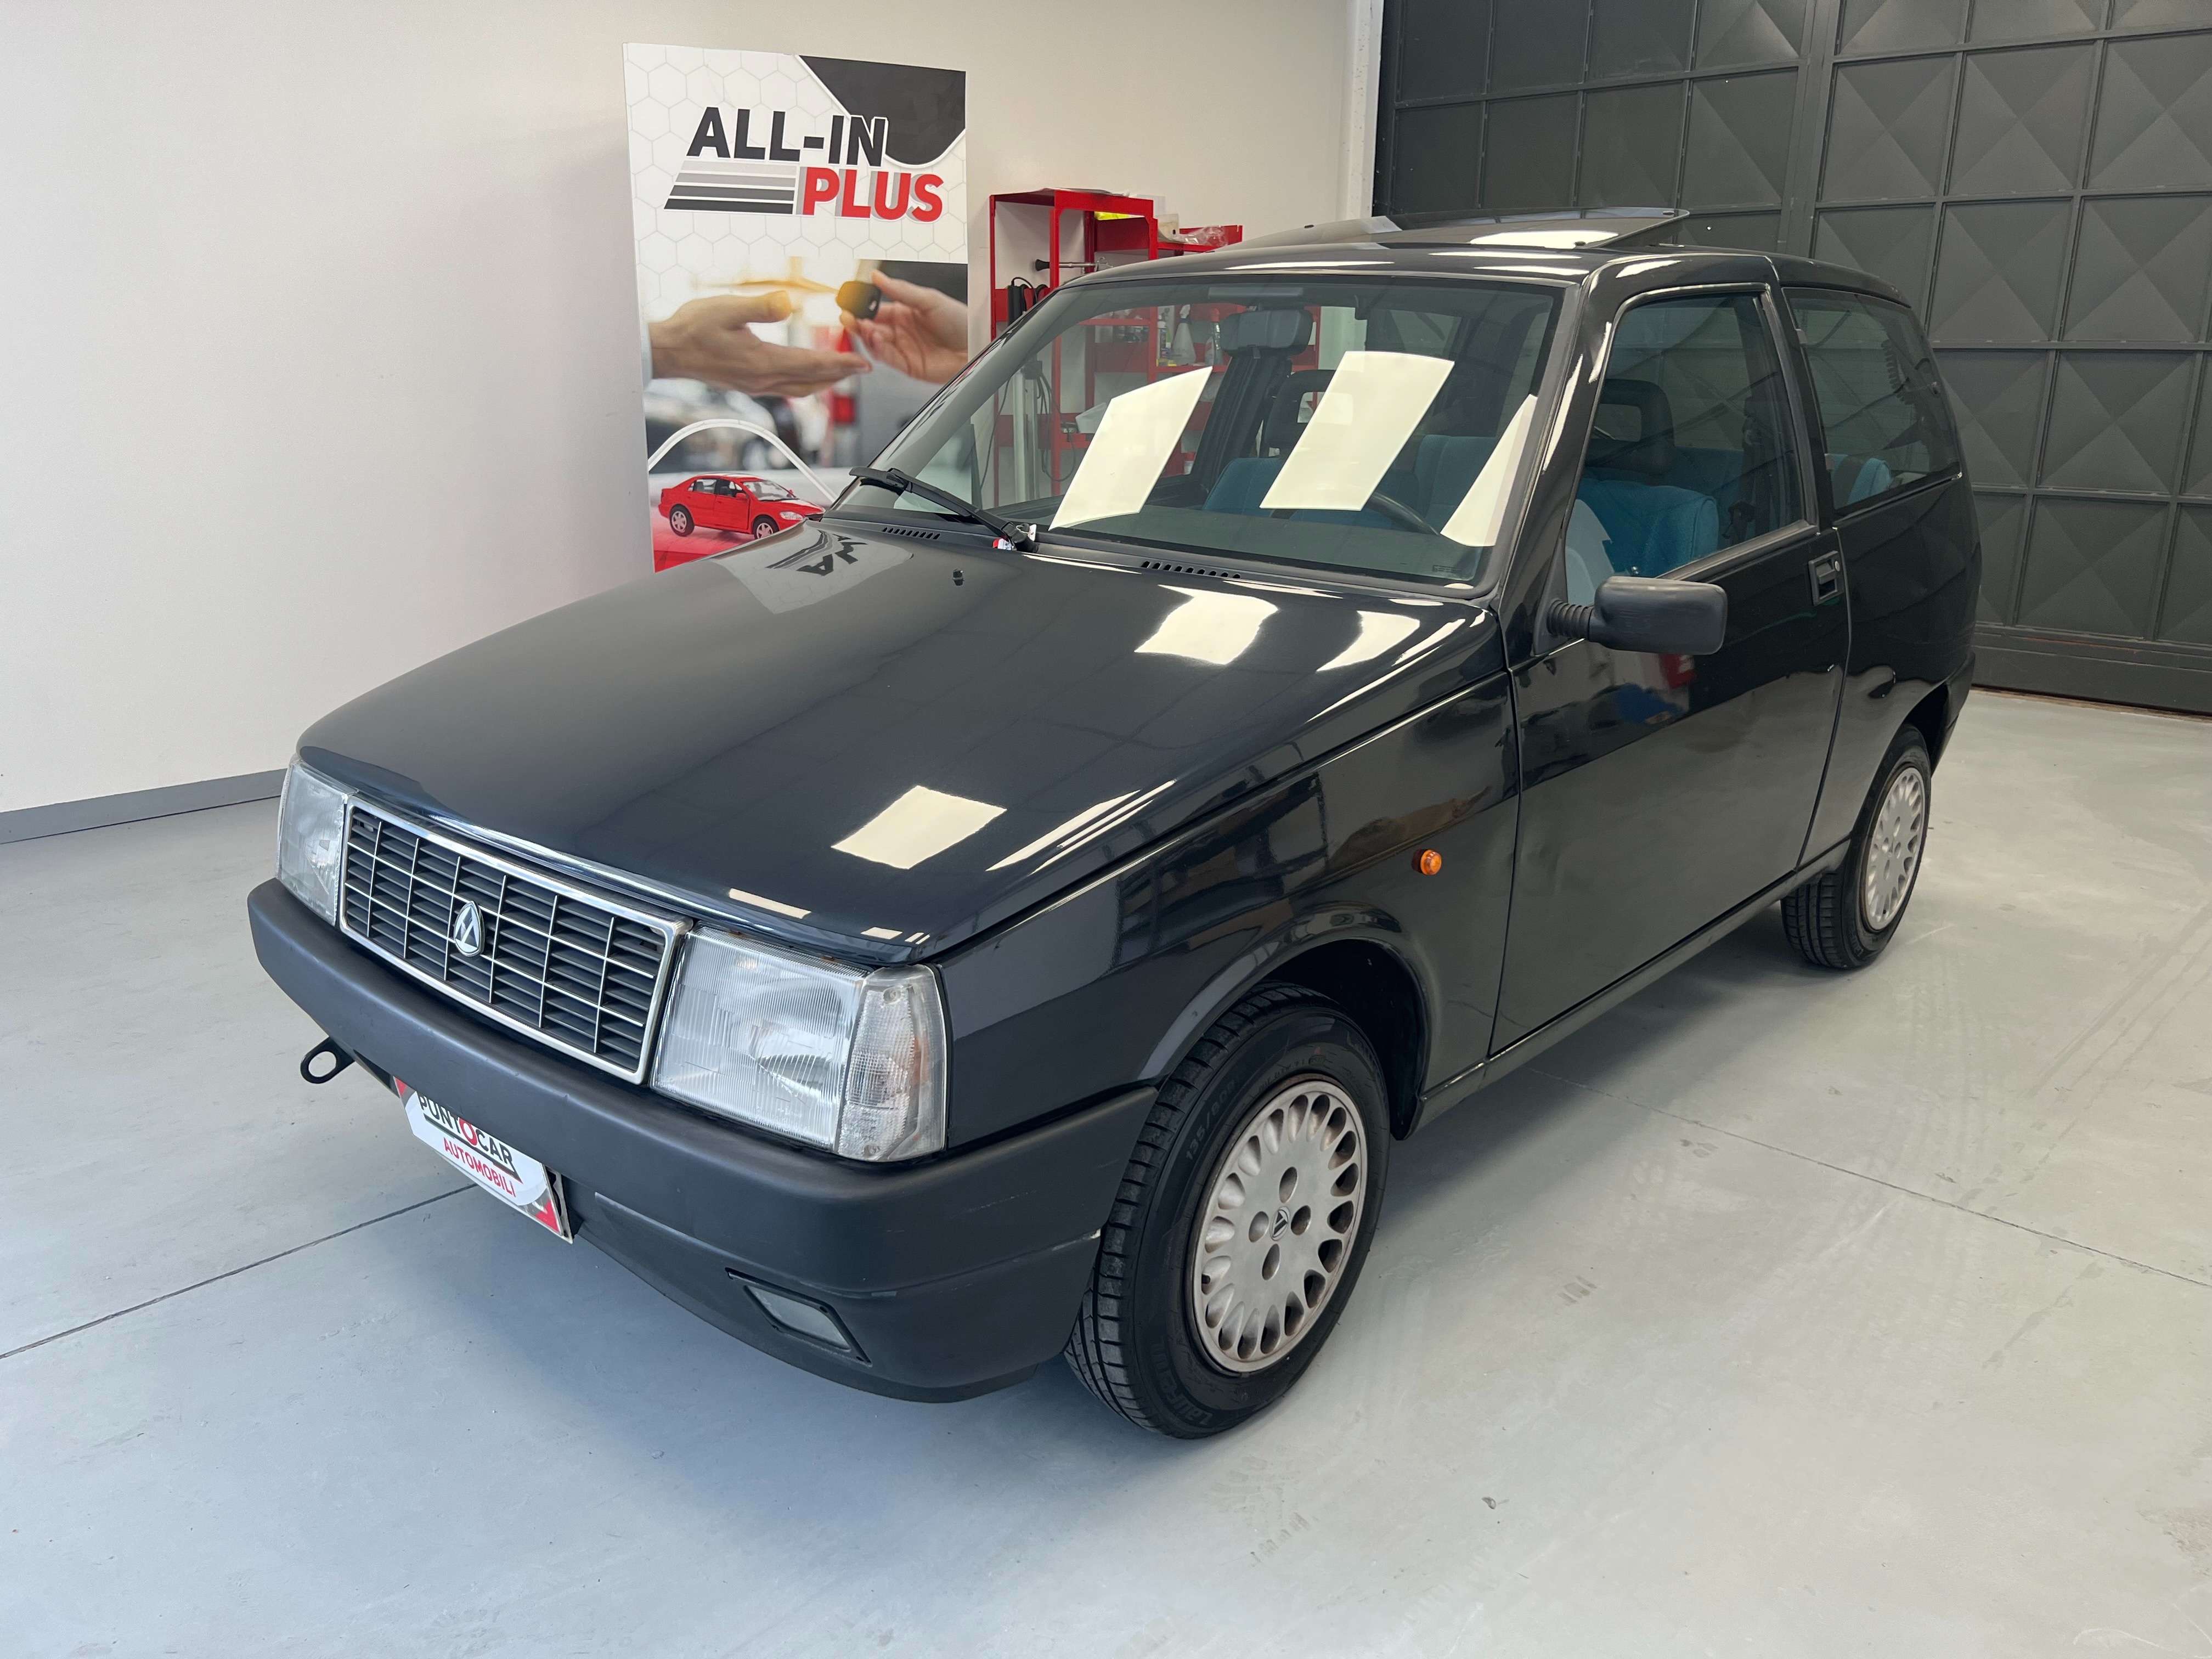 Autobianchi Y10 Other in Black used in Frossasco (TO) for € 3,500.-